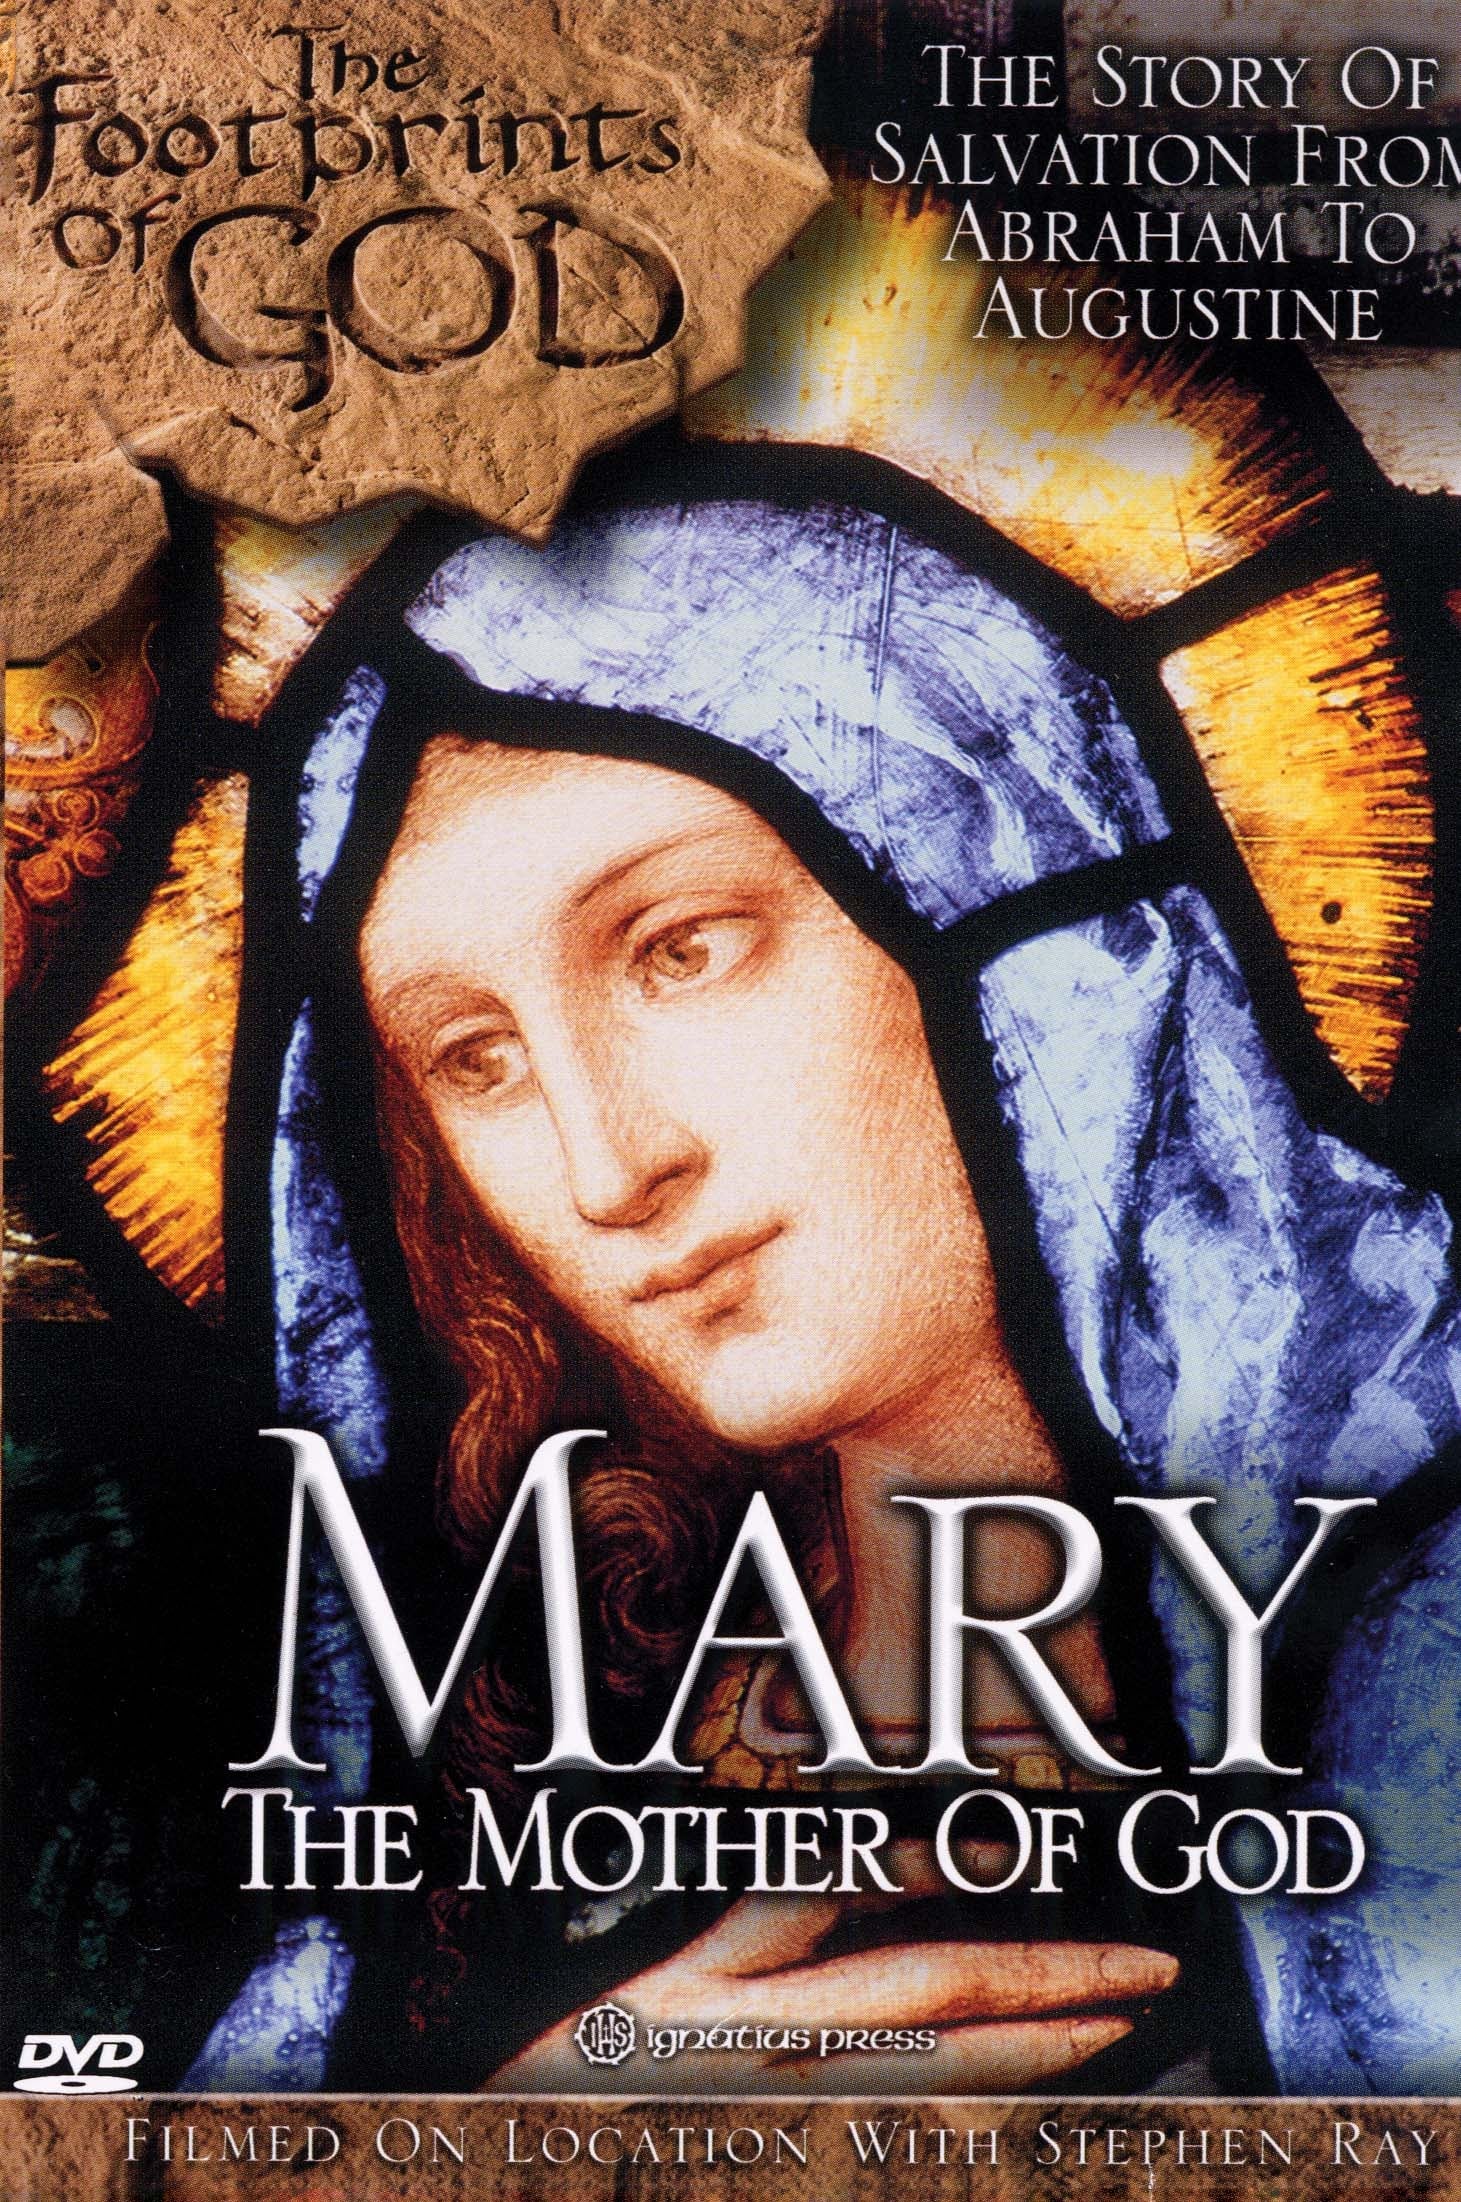 The Footprints of God: Mary the Mother of God